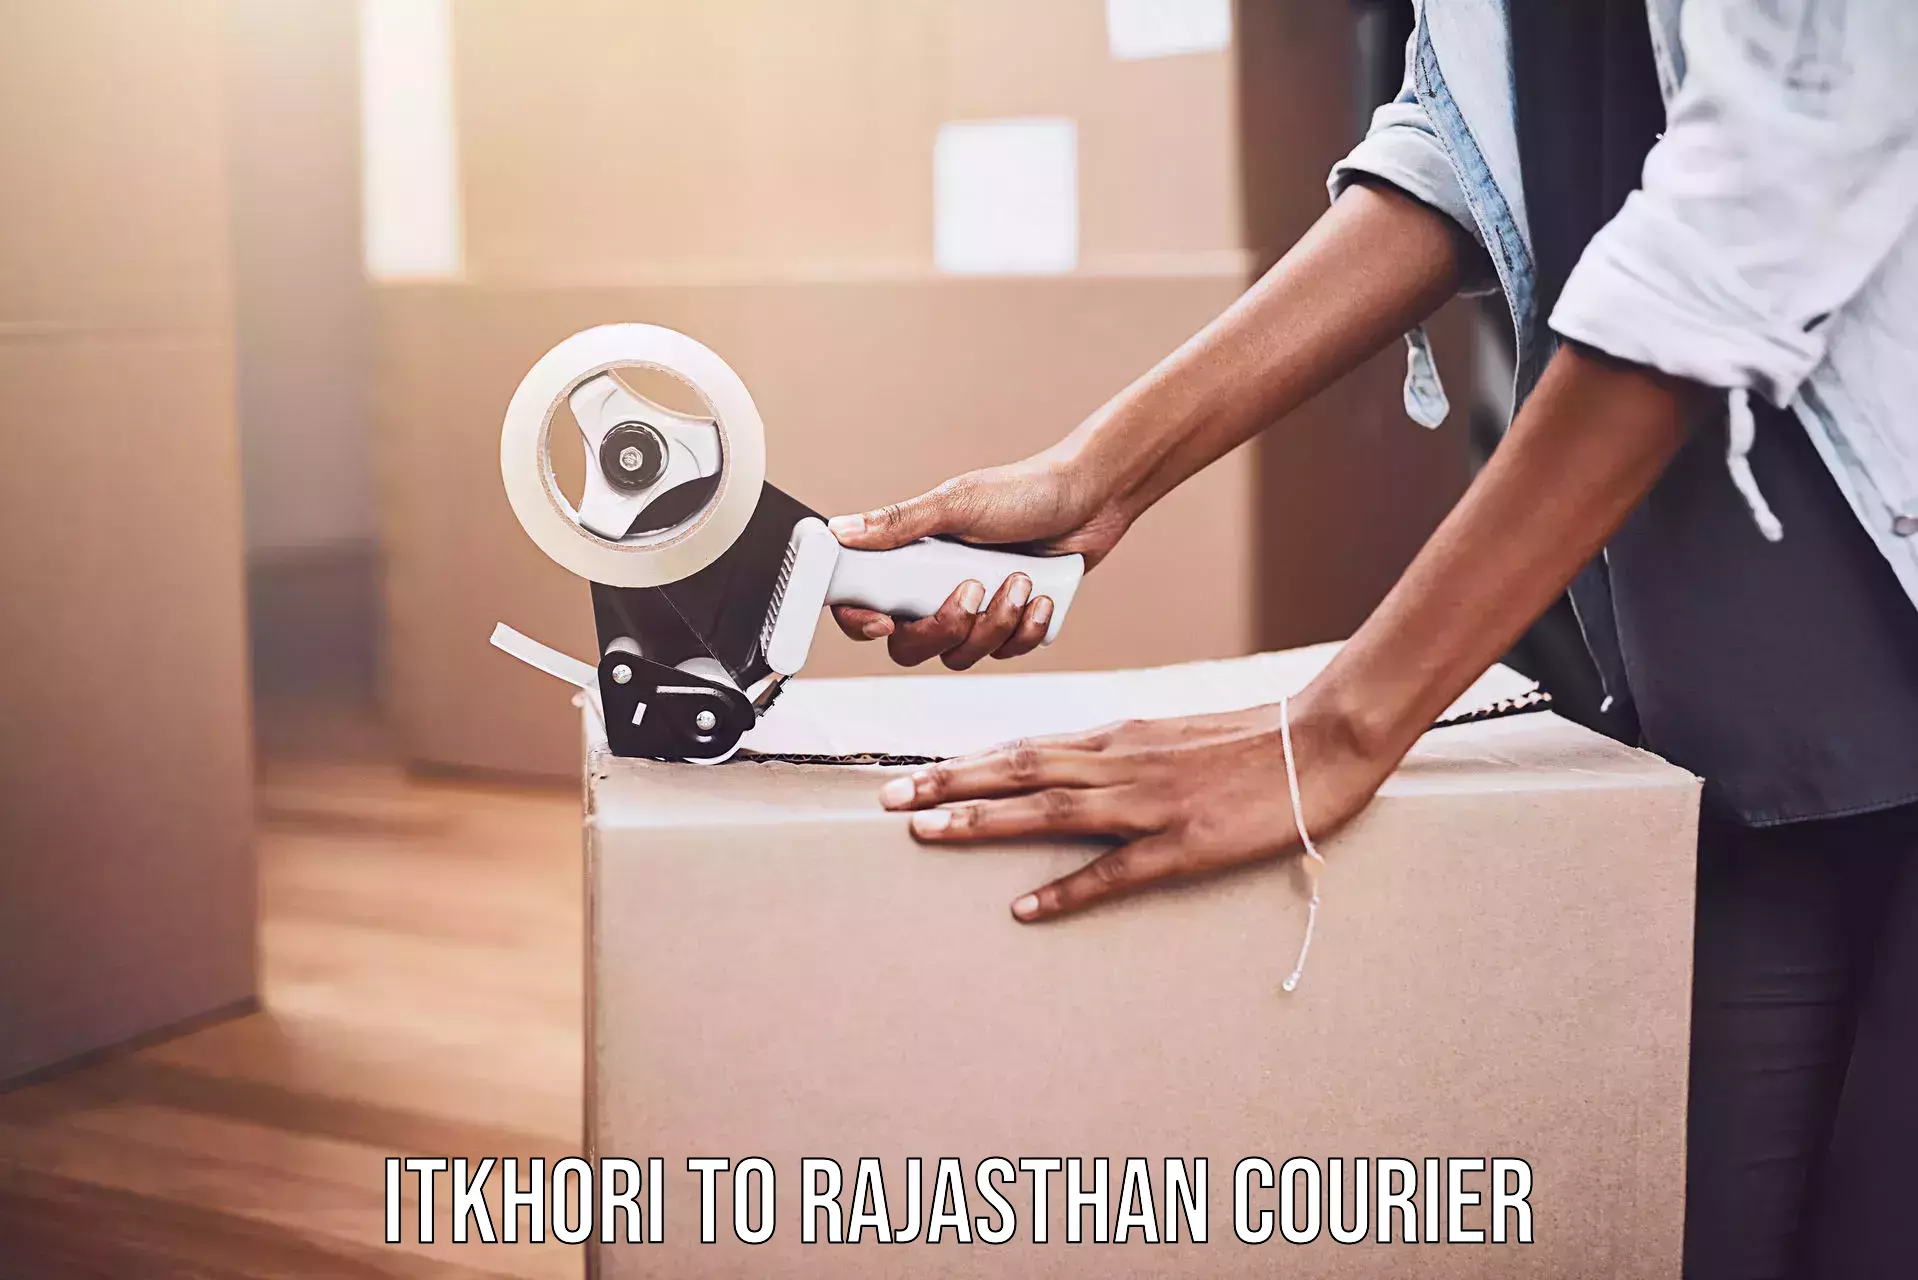 Courier service booking Itkhori to Fatehpur Sikar